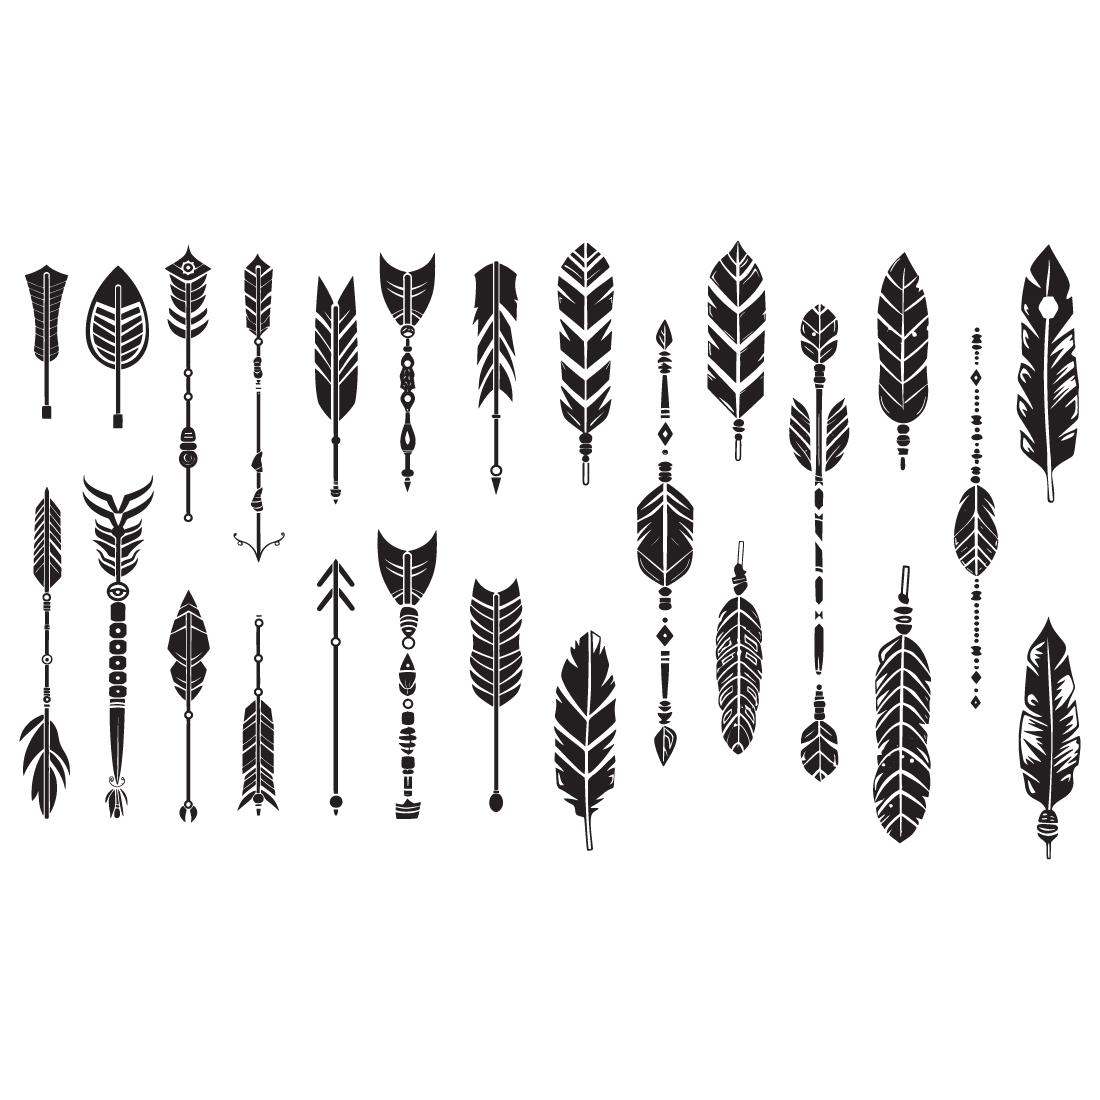 Boho arrows black silhouette, Arrow Feather Moon Illustrations preview image.